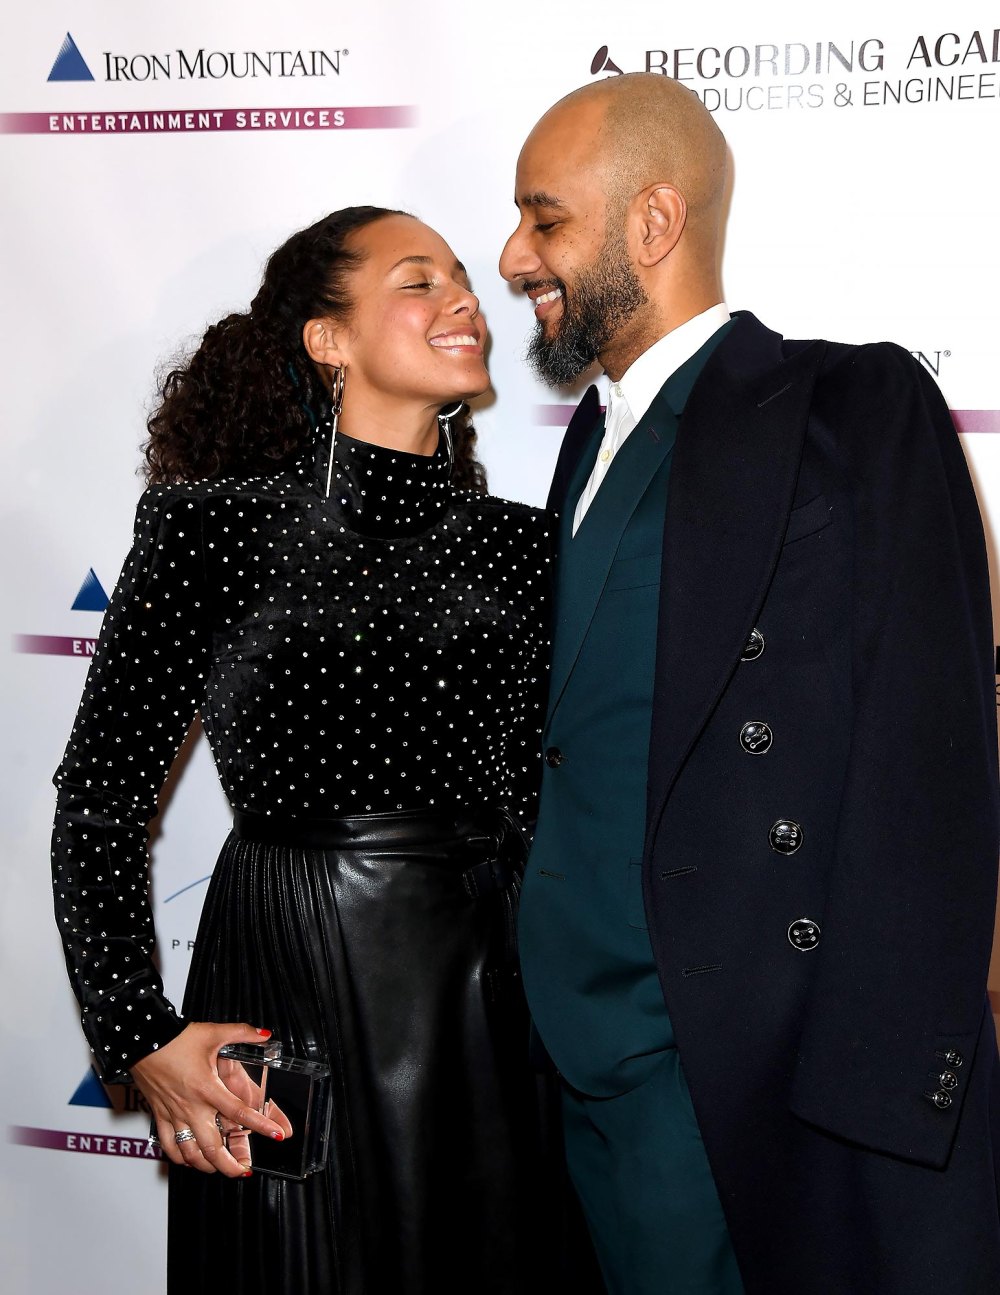 Swizz Beatz Slams Comments Over Wife Alicia Keys and Usher's Closeness During Halftime Show